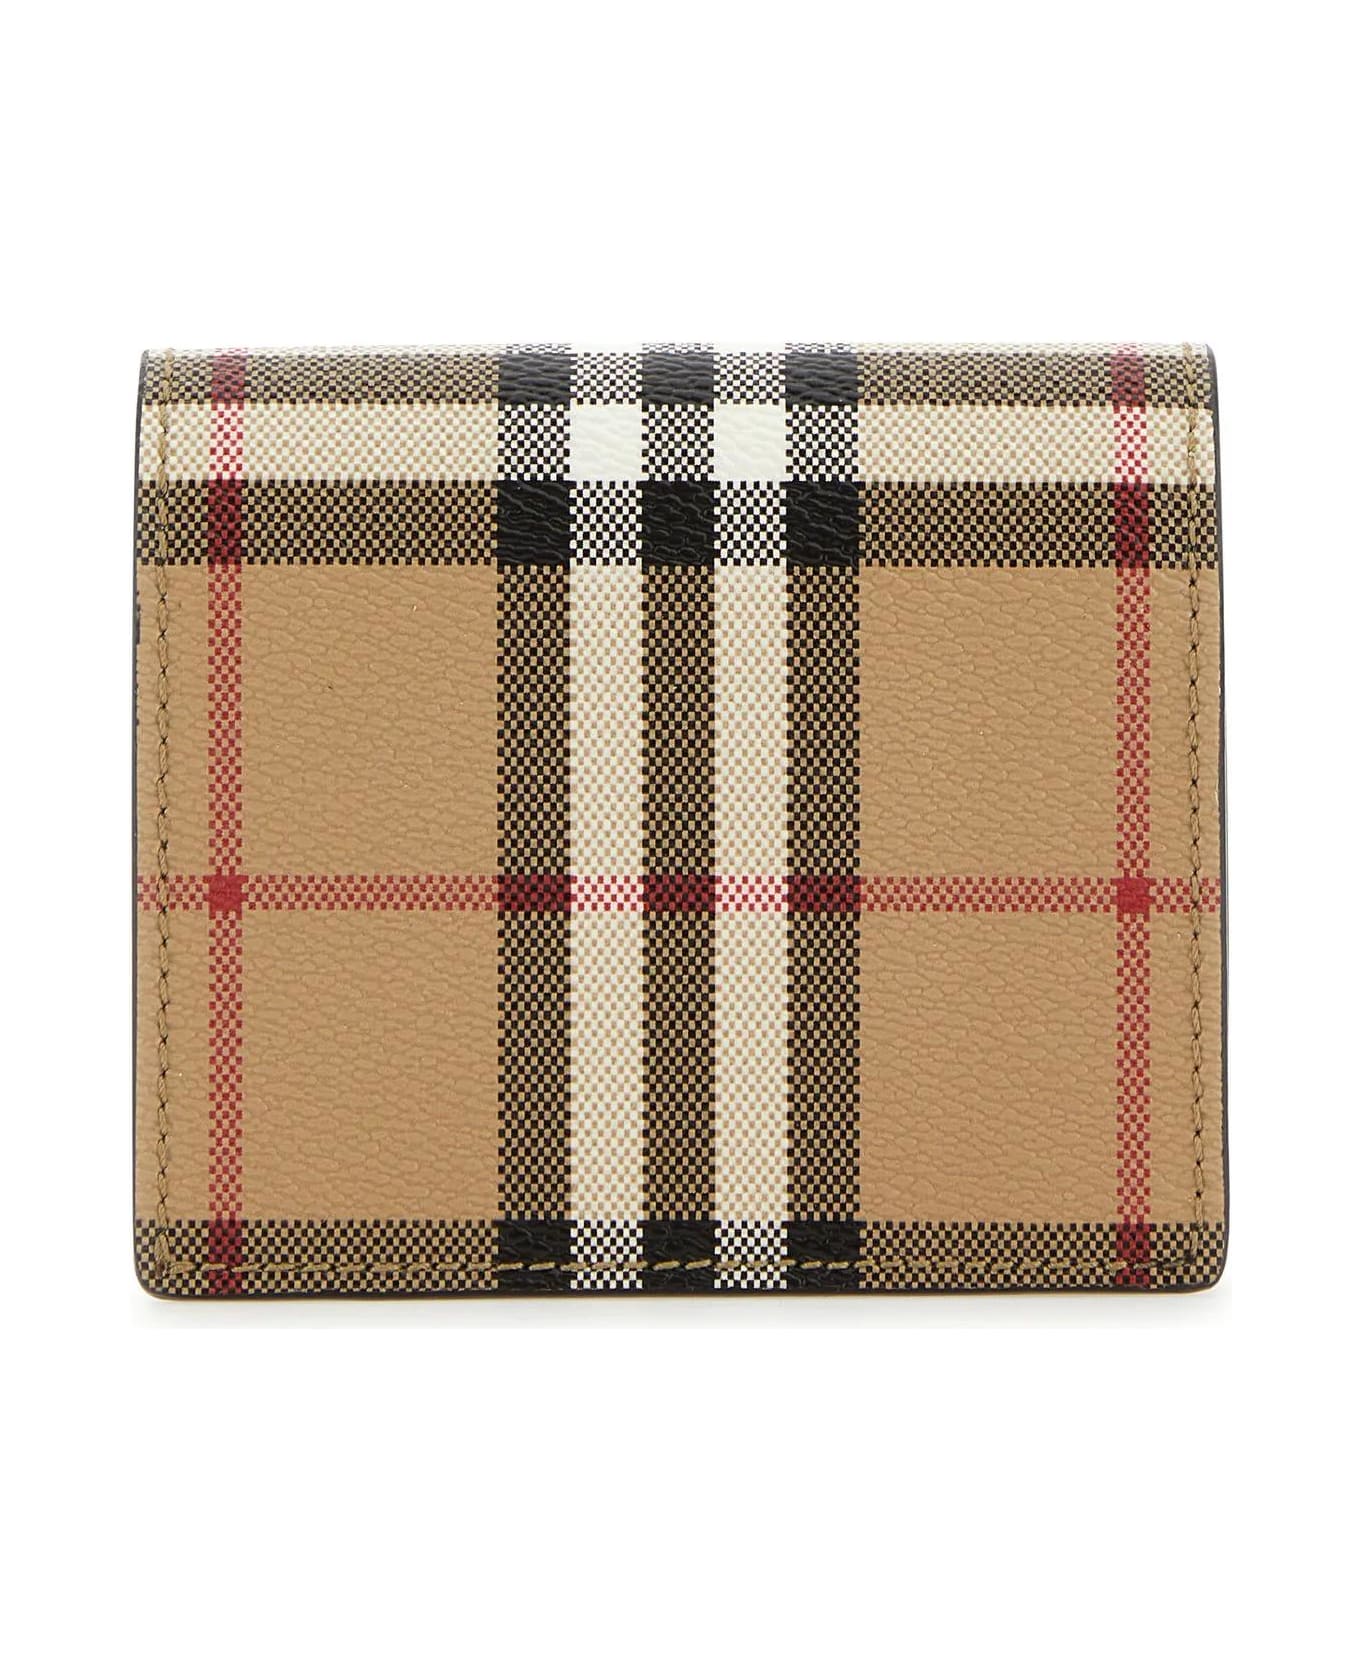 Burberry Printed Canvas Small Wallet - Beige